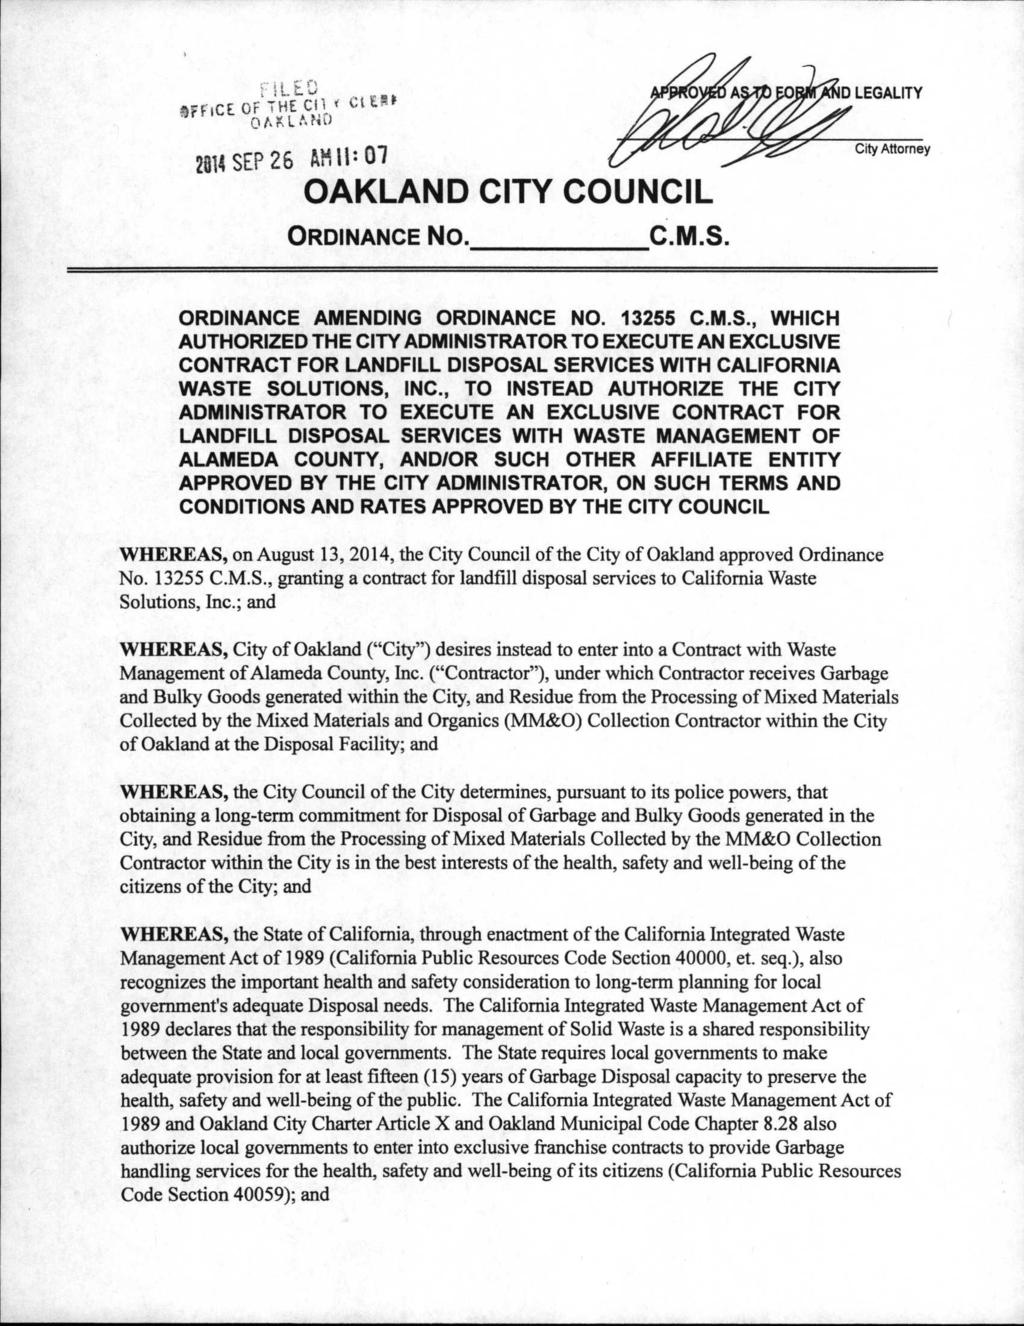 FFlCE OF THE Cil * ClE5> 2814 SEP 26 AH 11: 07 OAKLAND CITY COUNCIL ORDINANCE No. C.M.S. City Attorney ORDINANCE AMENDING ORDINANCE NO. 13255 C.M.S., WHICH AUTHORIZED THE CITY ADMINISTRATOR TO EXECUTE AN EXCLUSIVE CONTRACT FOR LANDFILL DISPOSAL SERVICES WITH CALIFORNIA WASTE SOLUTIONS, INC.